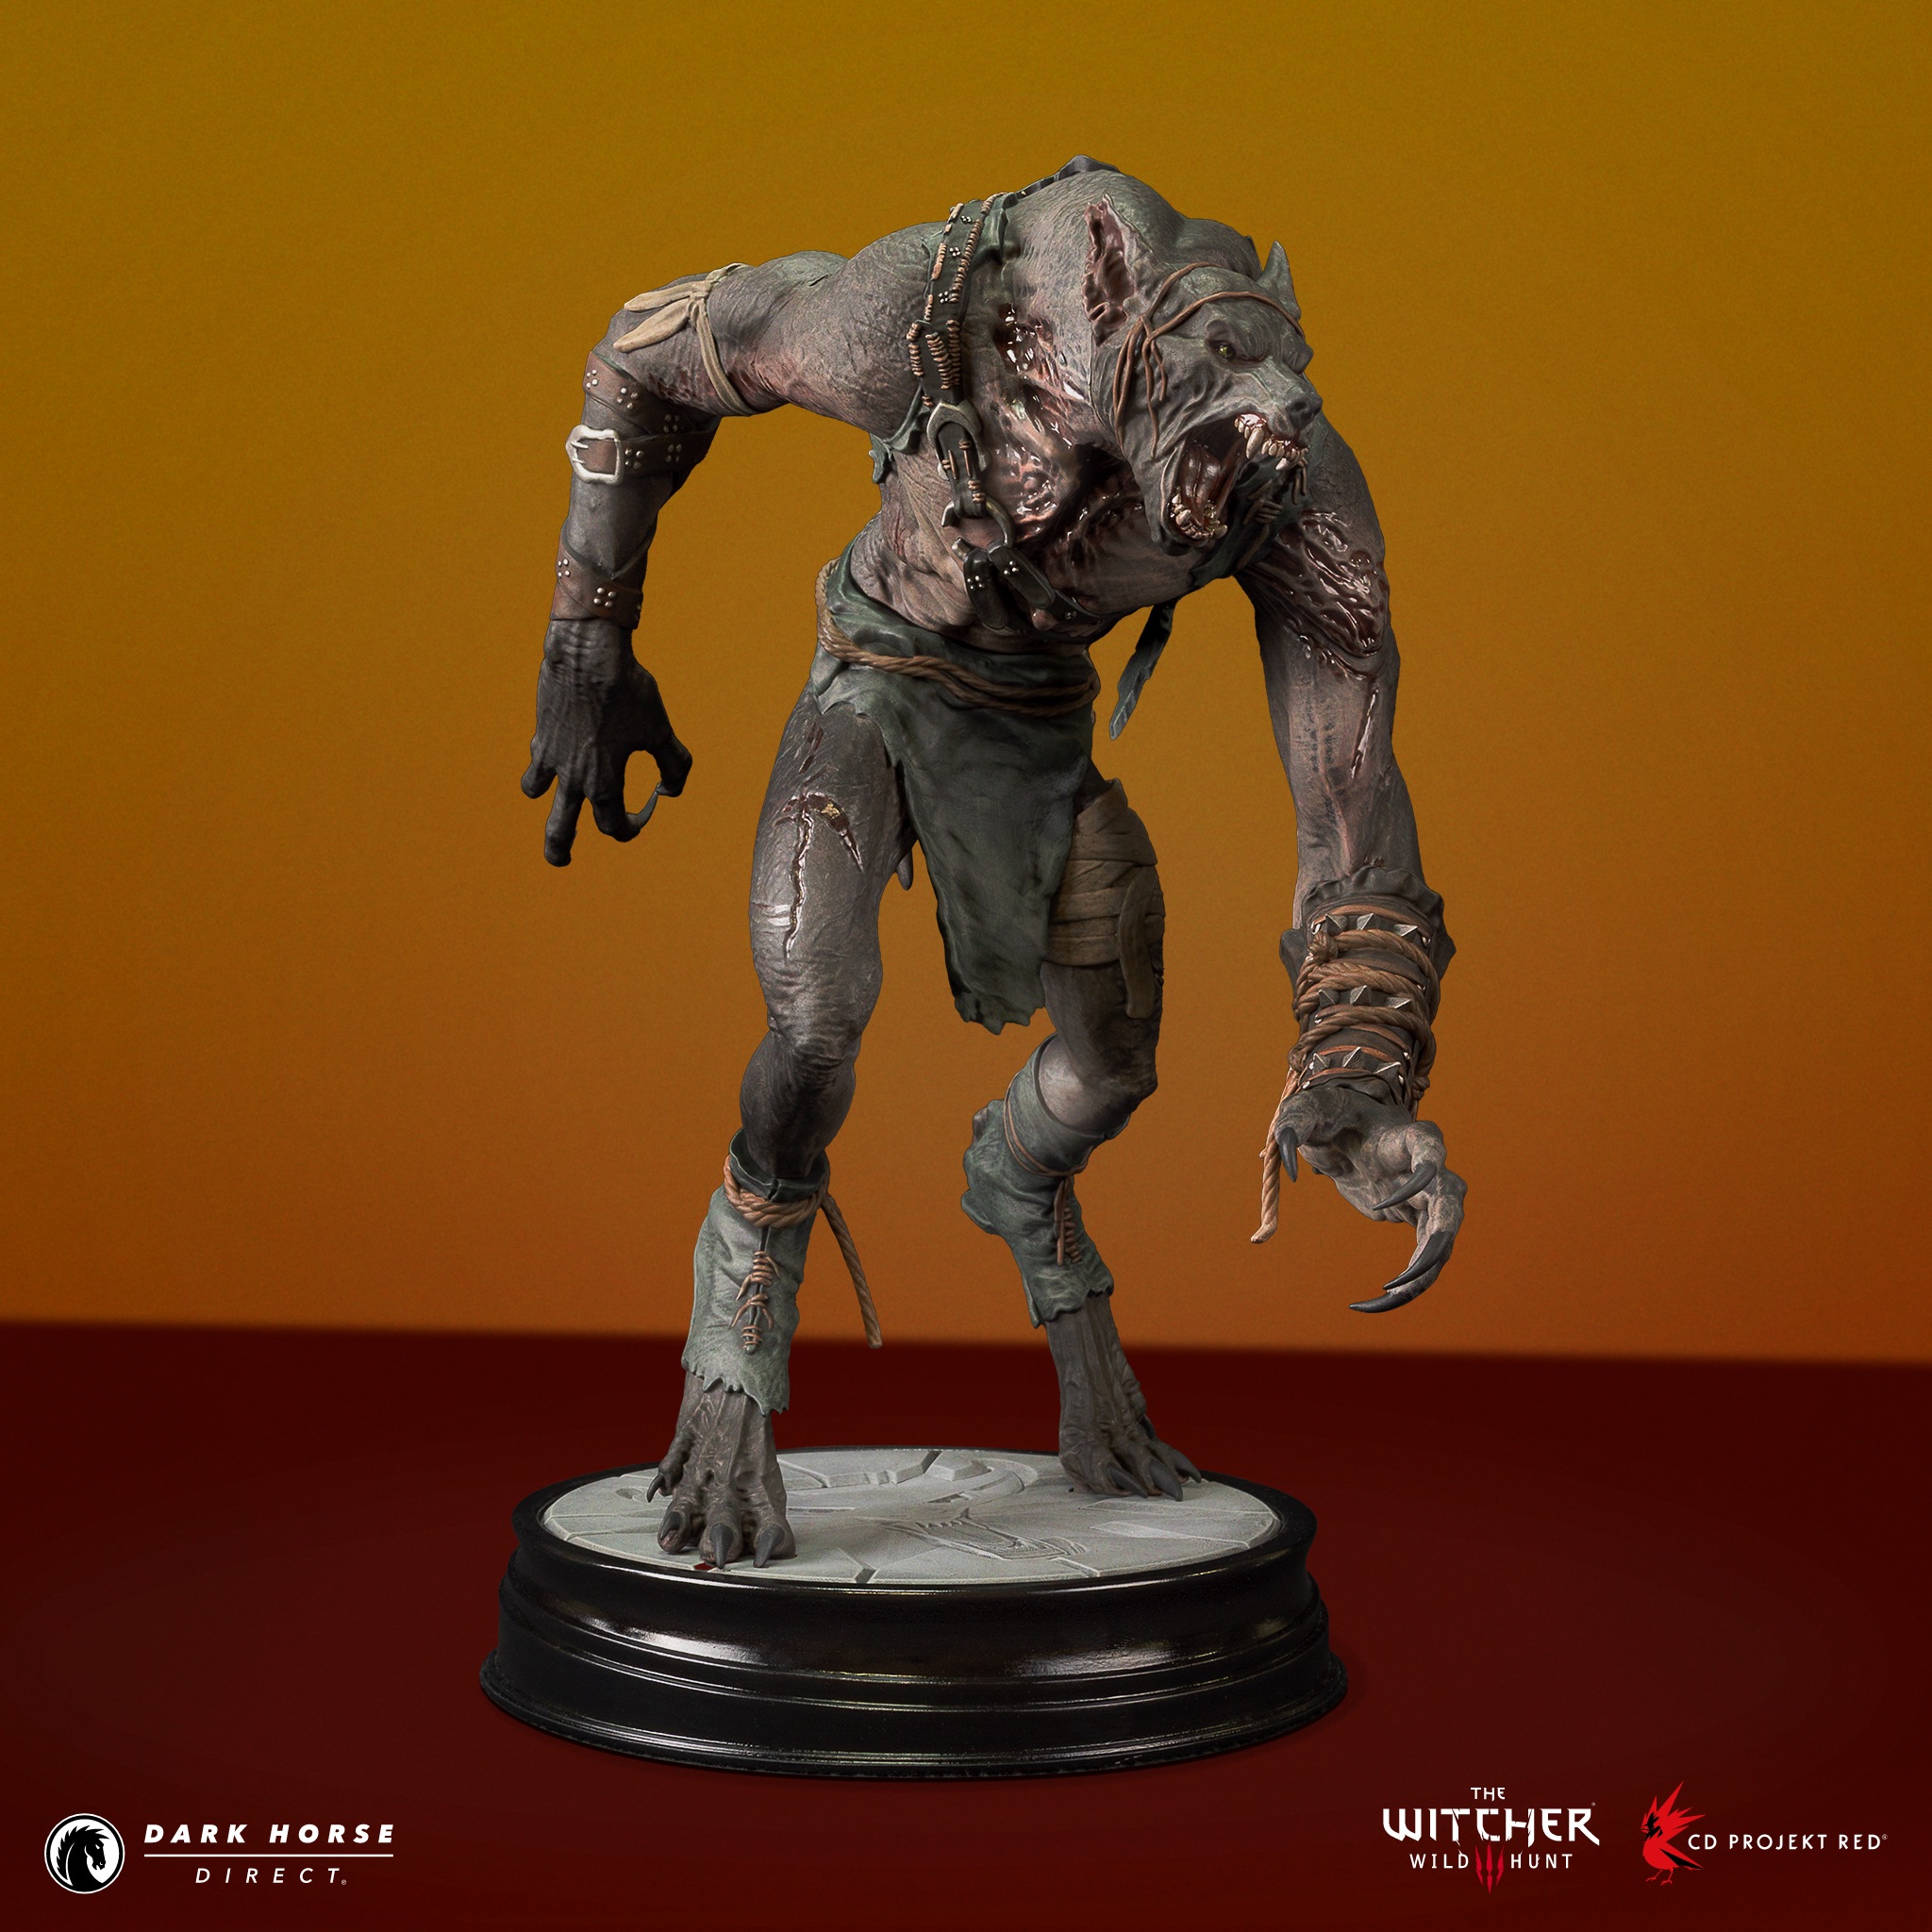 TAME DEADLY MONSTERS WITH THESE NEW “THE WITCHER 3: WILD HUNT” PVC FIGURES  FROM DARK HORSE DIRECT :: Blog :: Dark Horse Comics